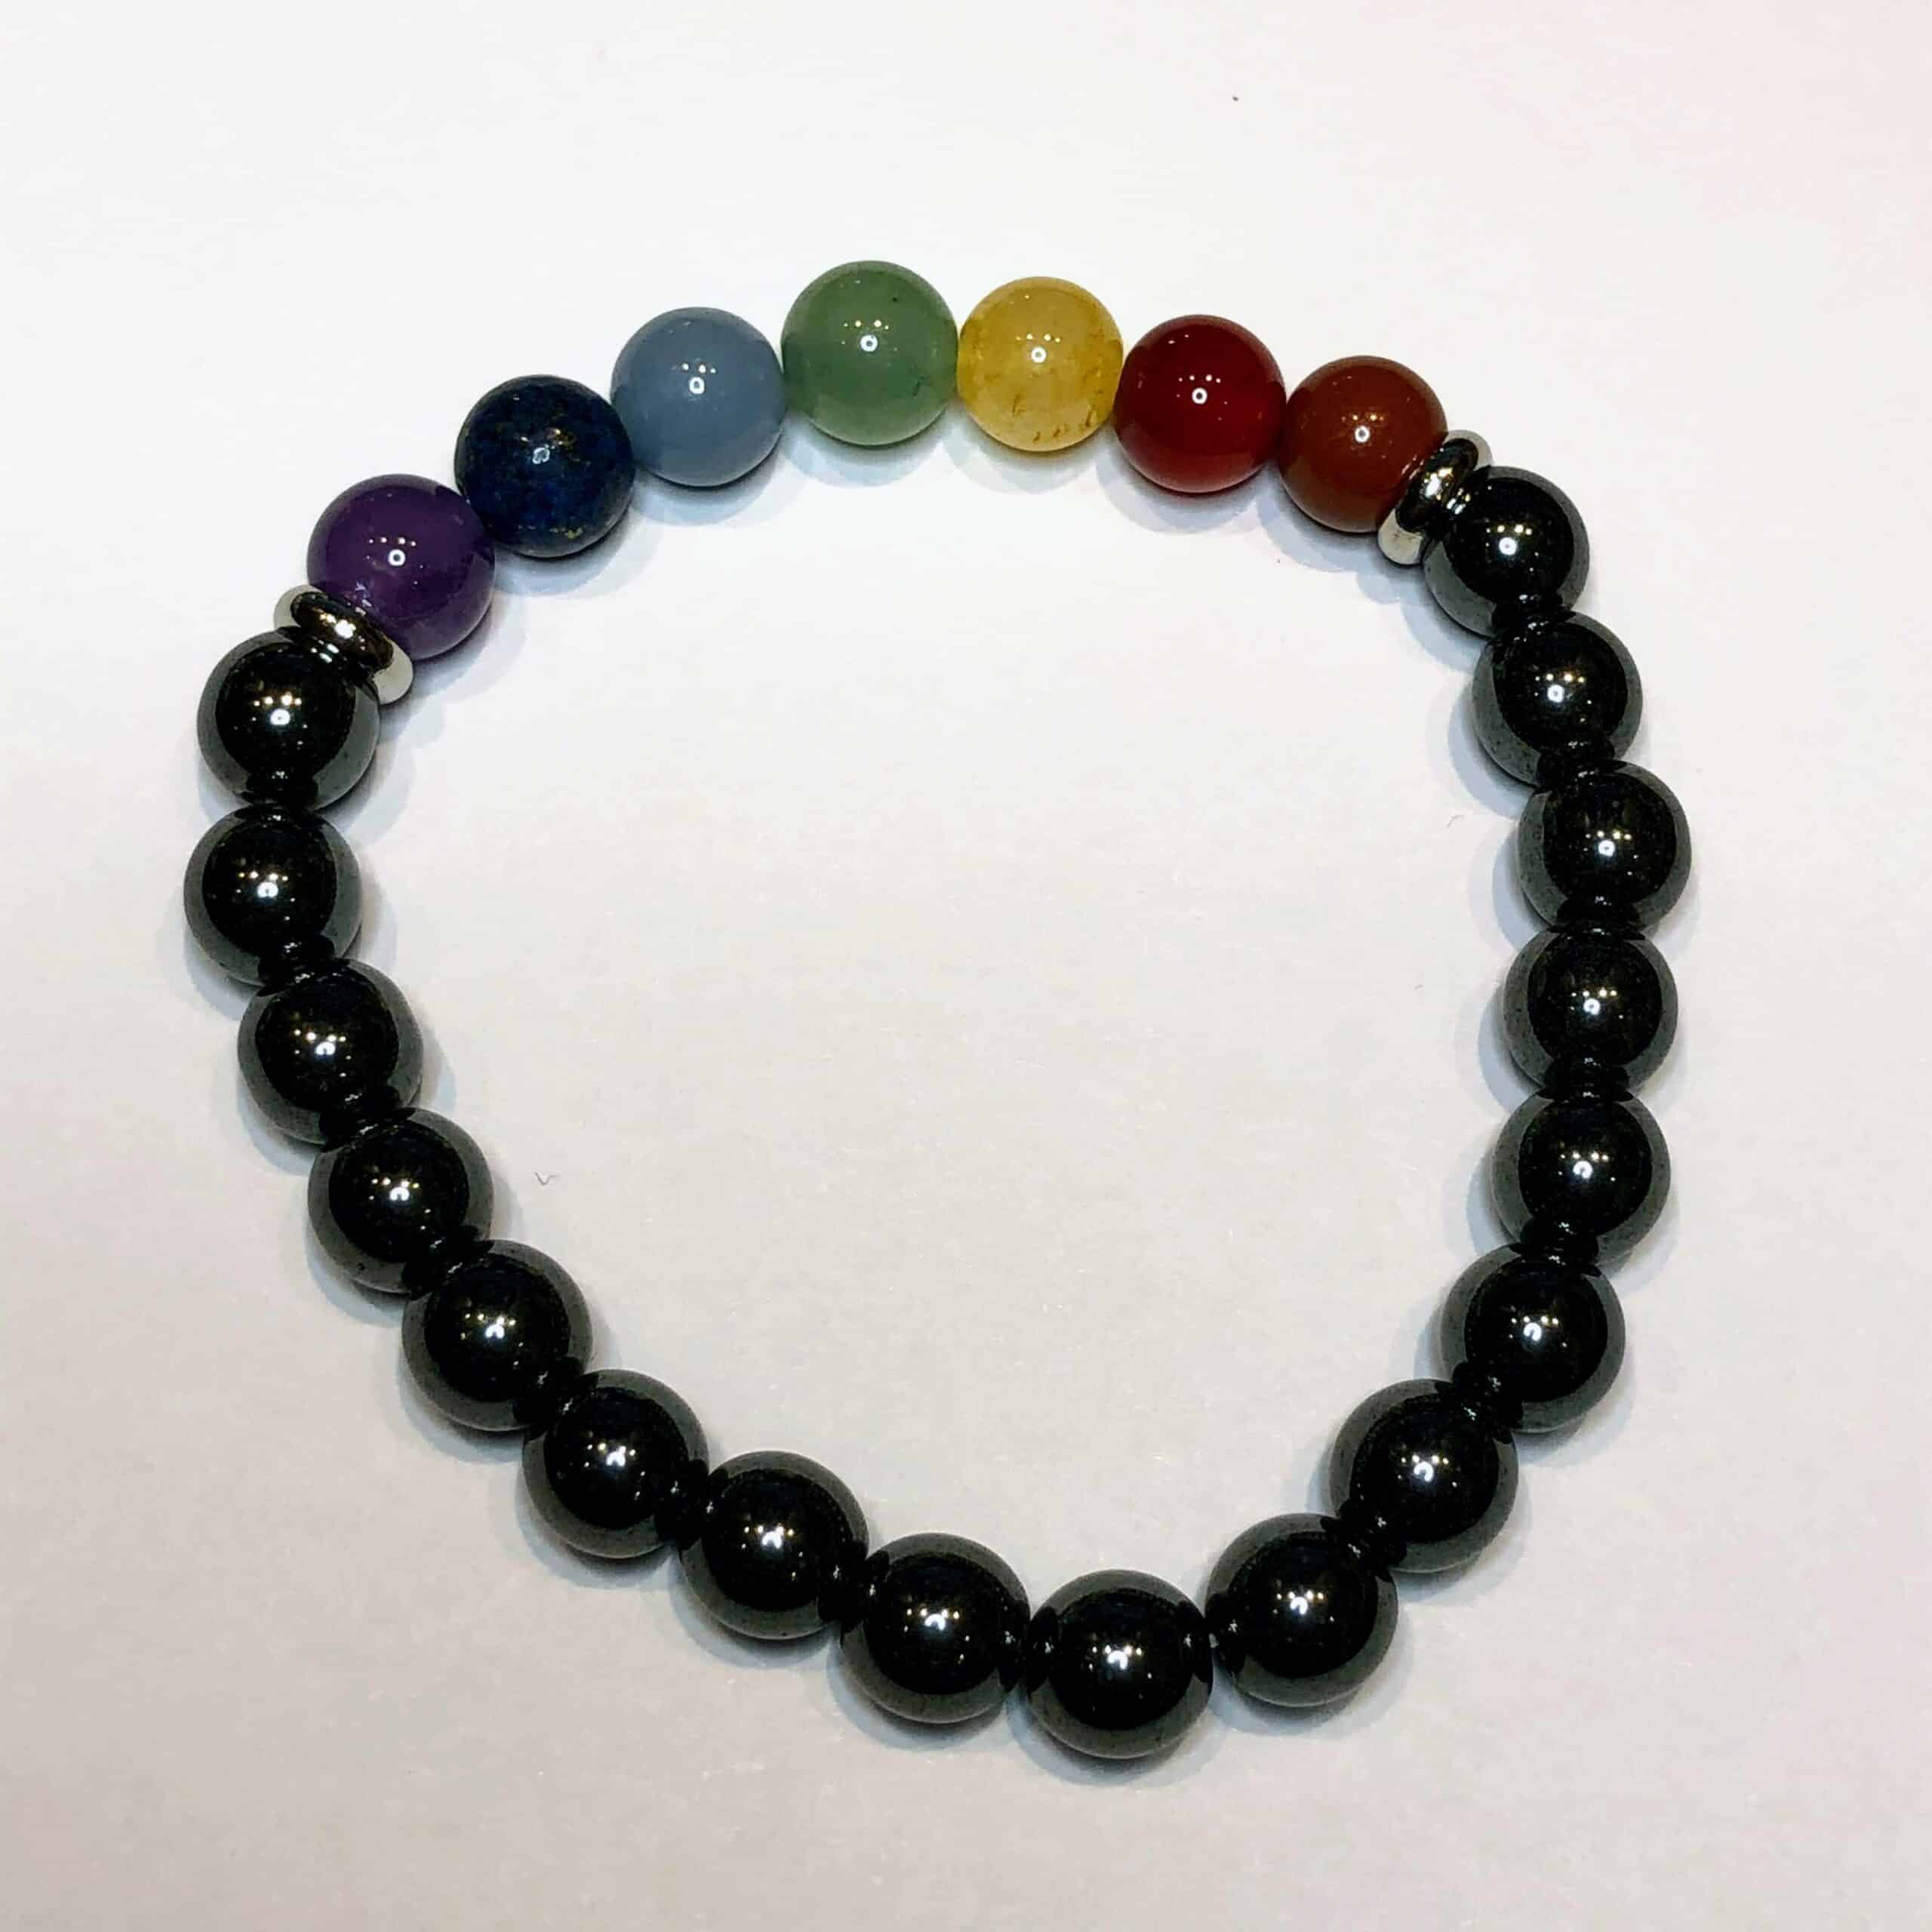 Seven Chakra Energy Bracelet with hematite beads 8mm and Natural Healing Stones! 